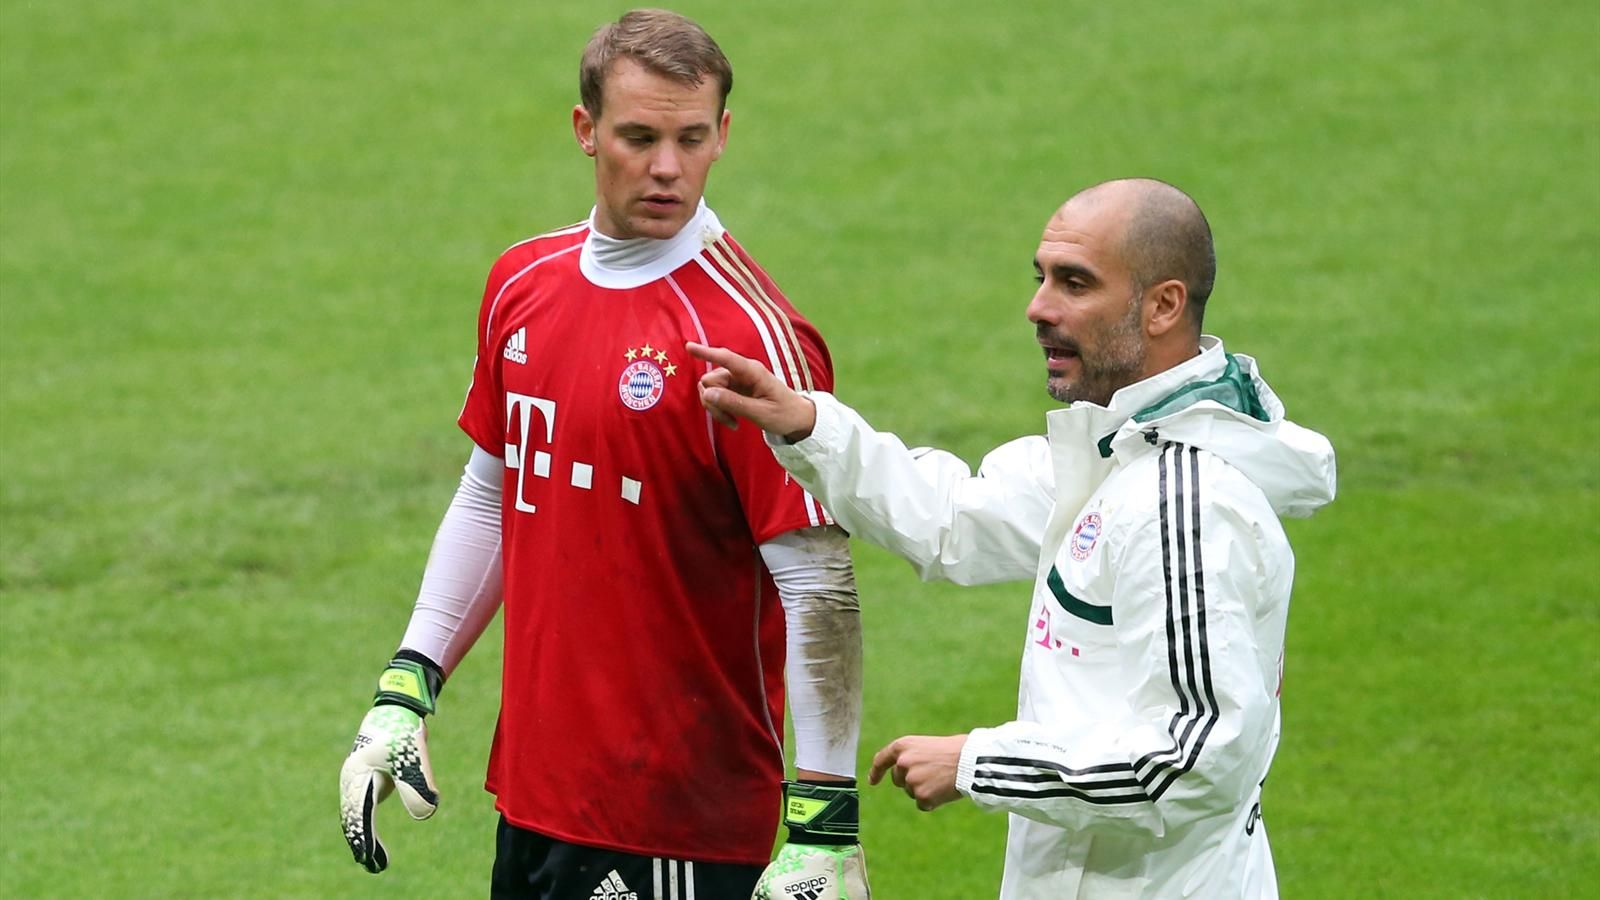 guardiola wanted to play keeper neuer in midfield says bayern s rummenigge